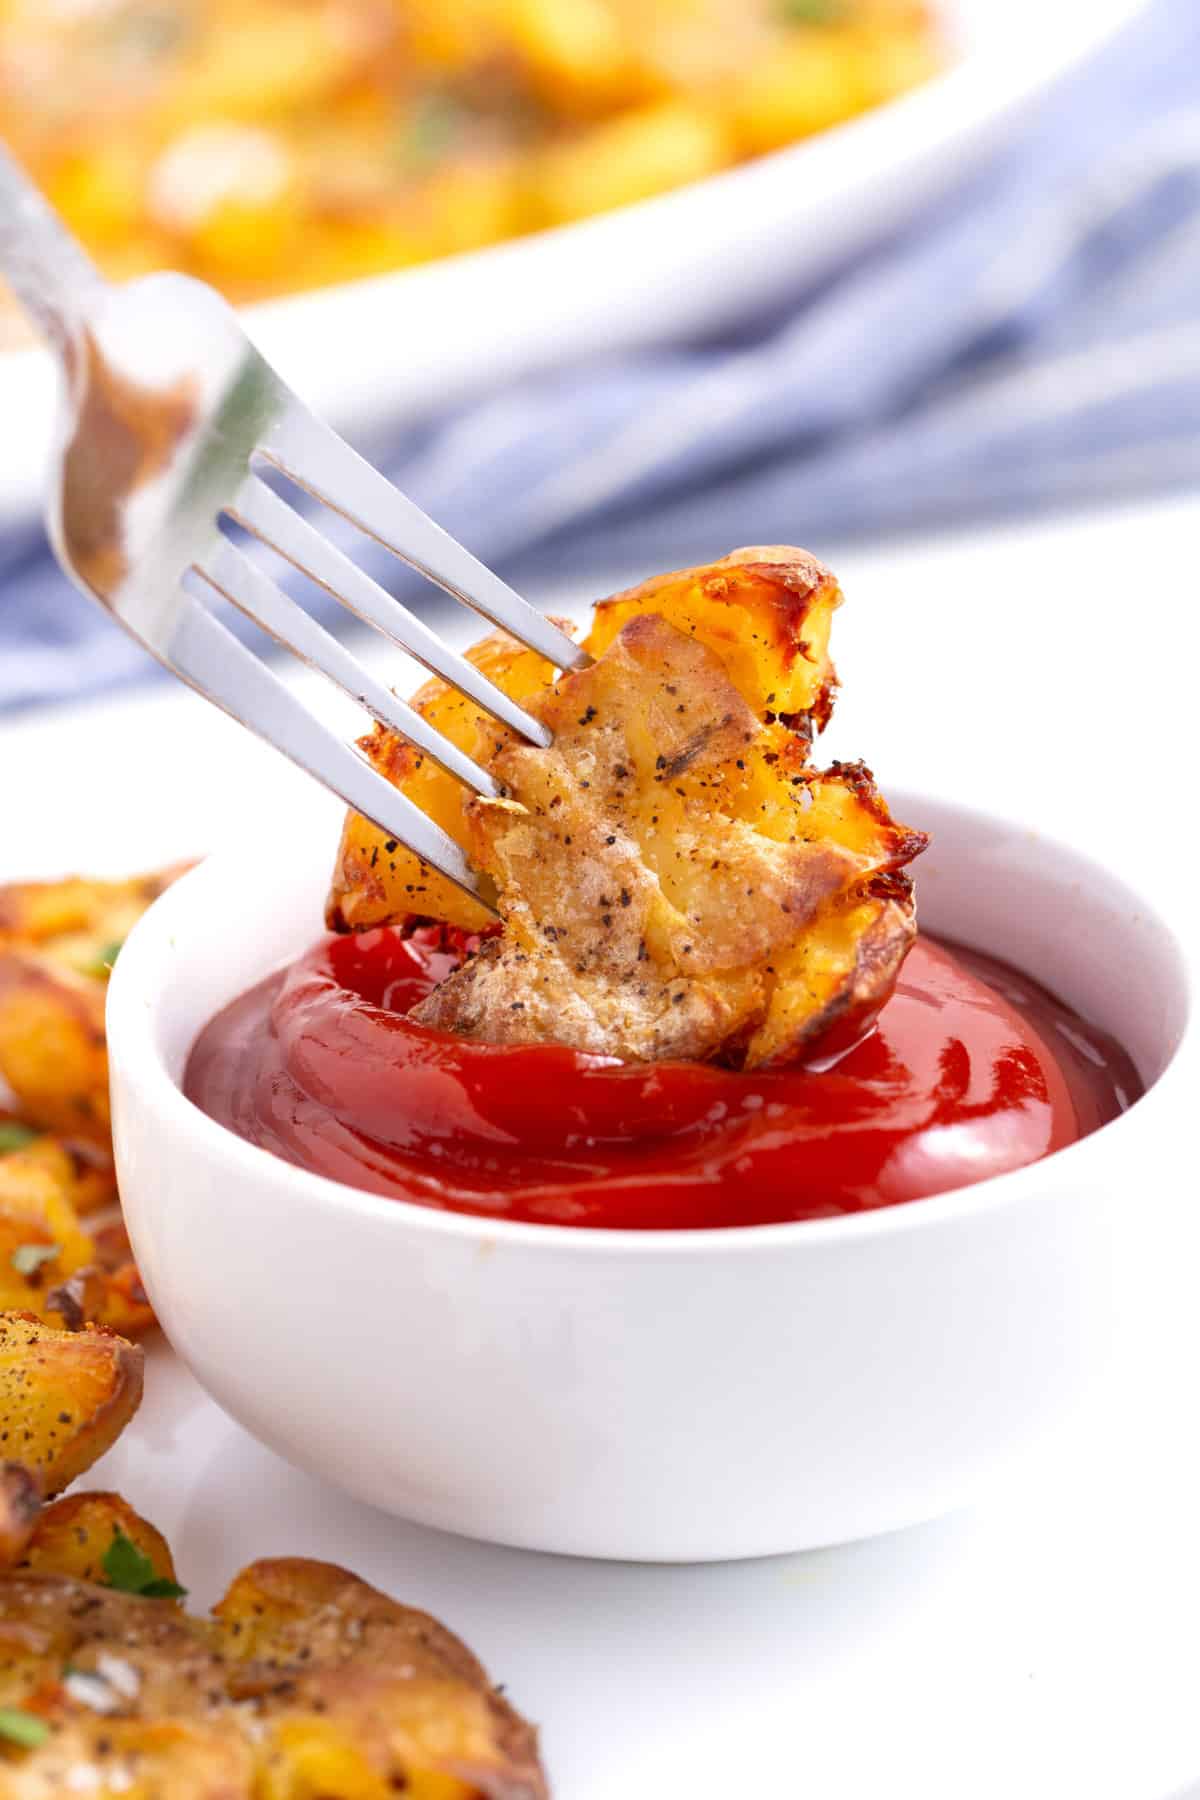 one crispy smashed potato on a fork dipping into ketchup